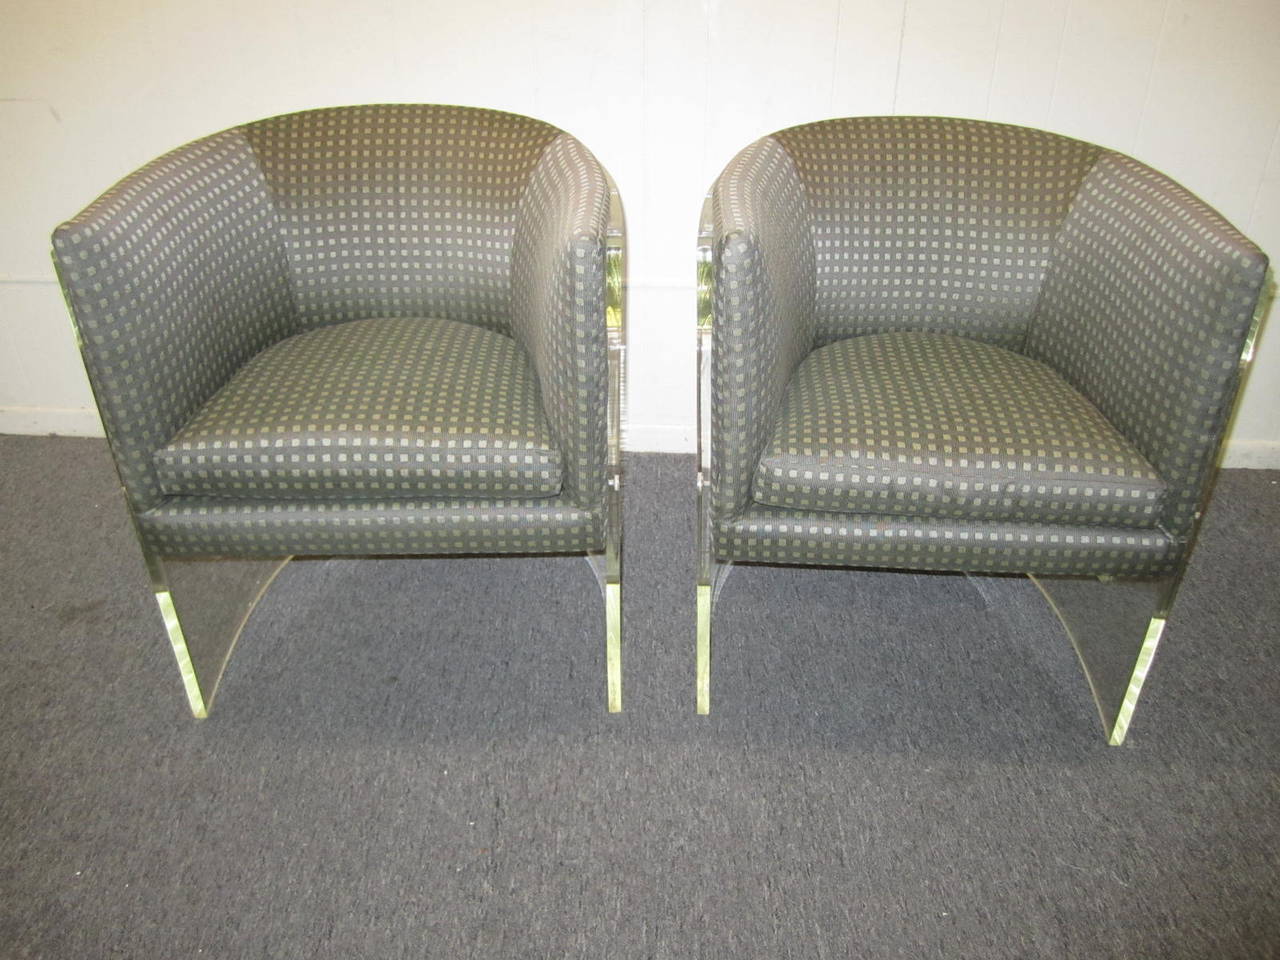 Hollywood Regency Excellent Pair of Milo Baughman Lucite Barrel Back Chairs, Mid-Century Modern